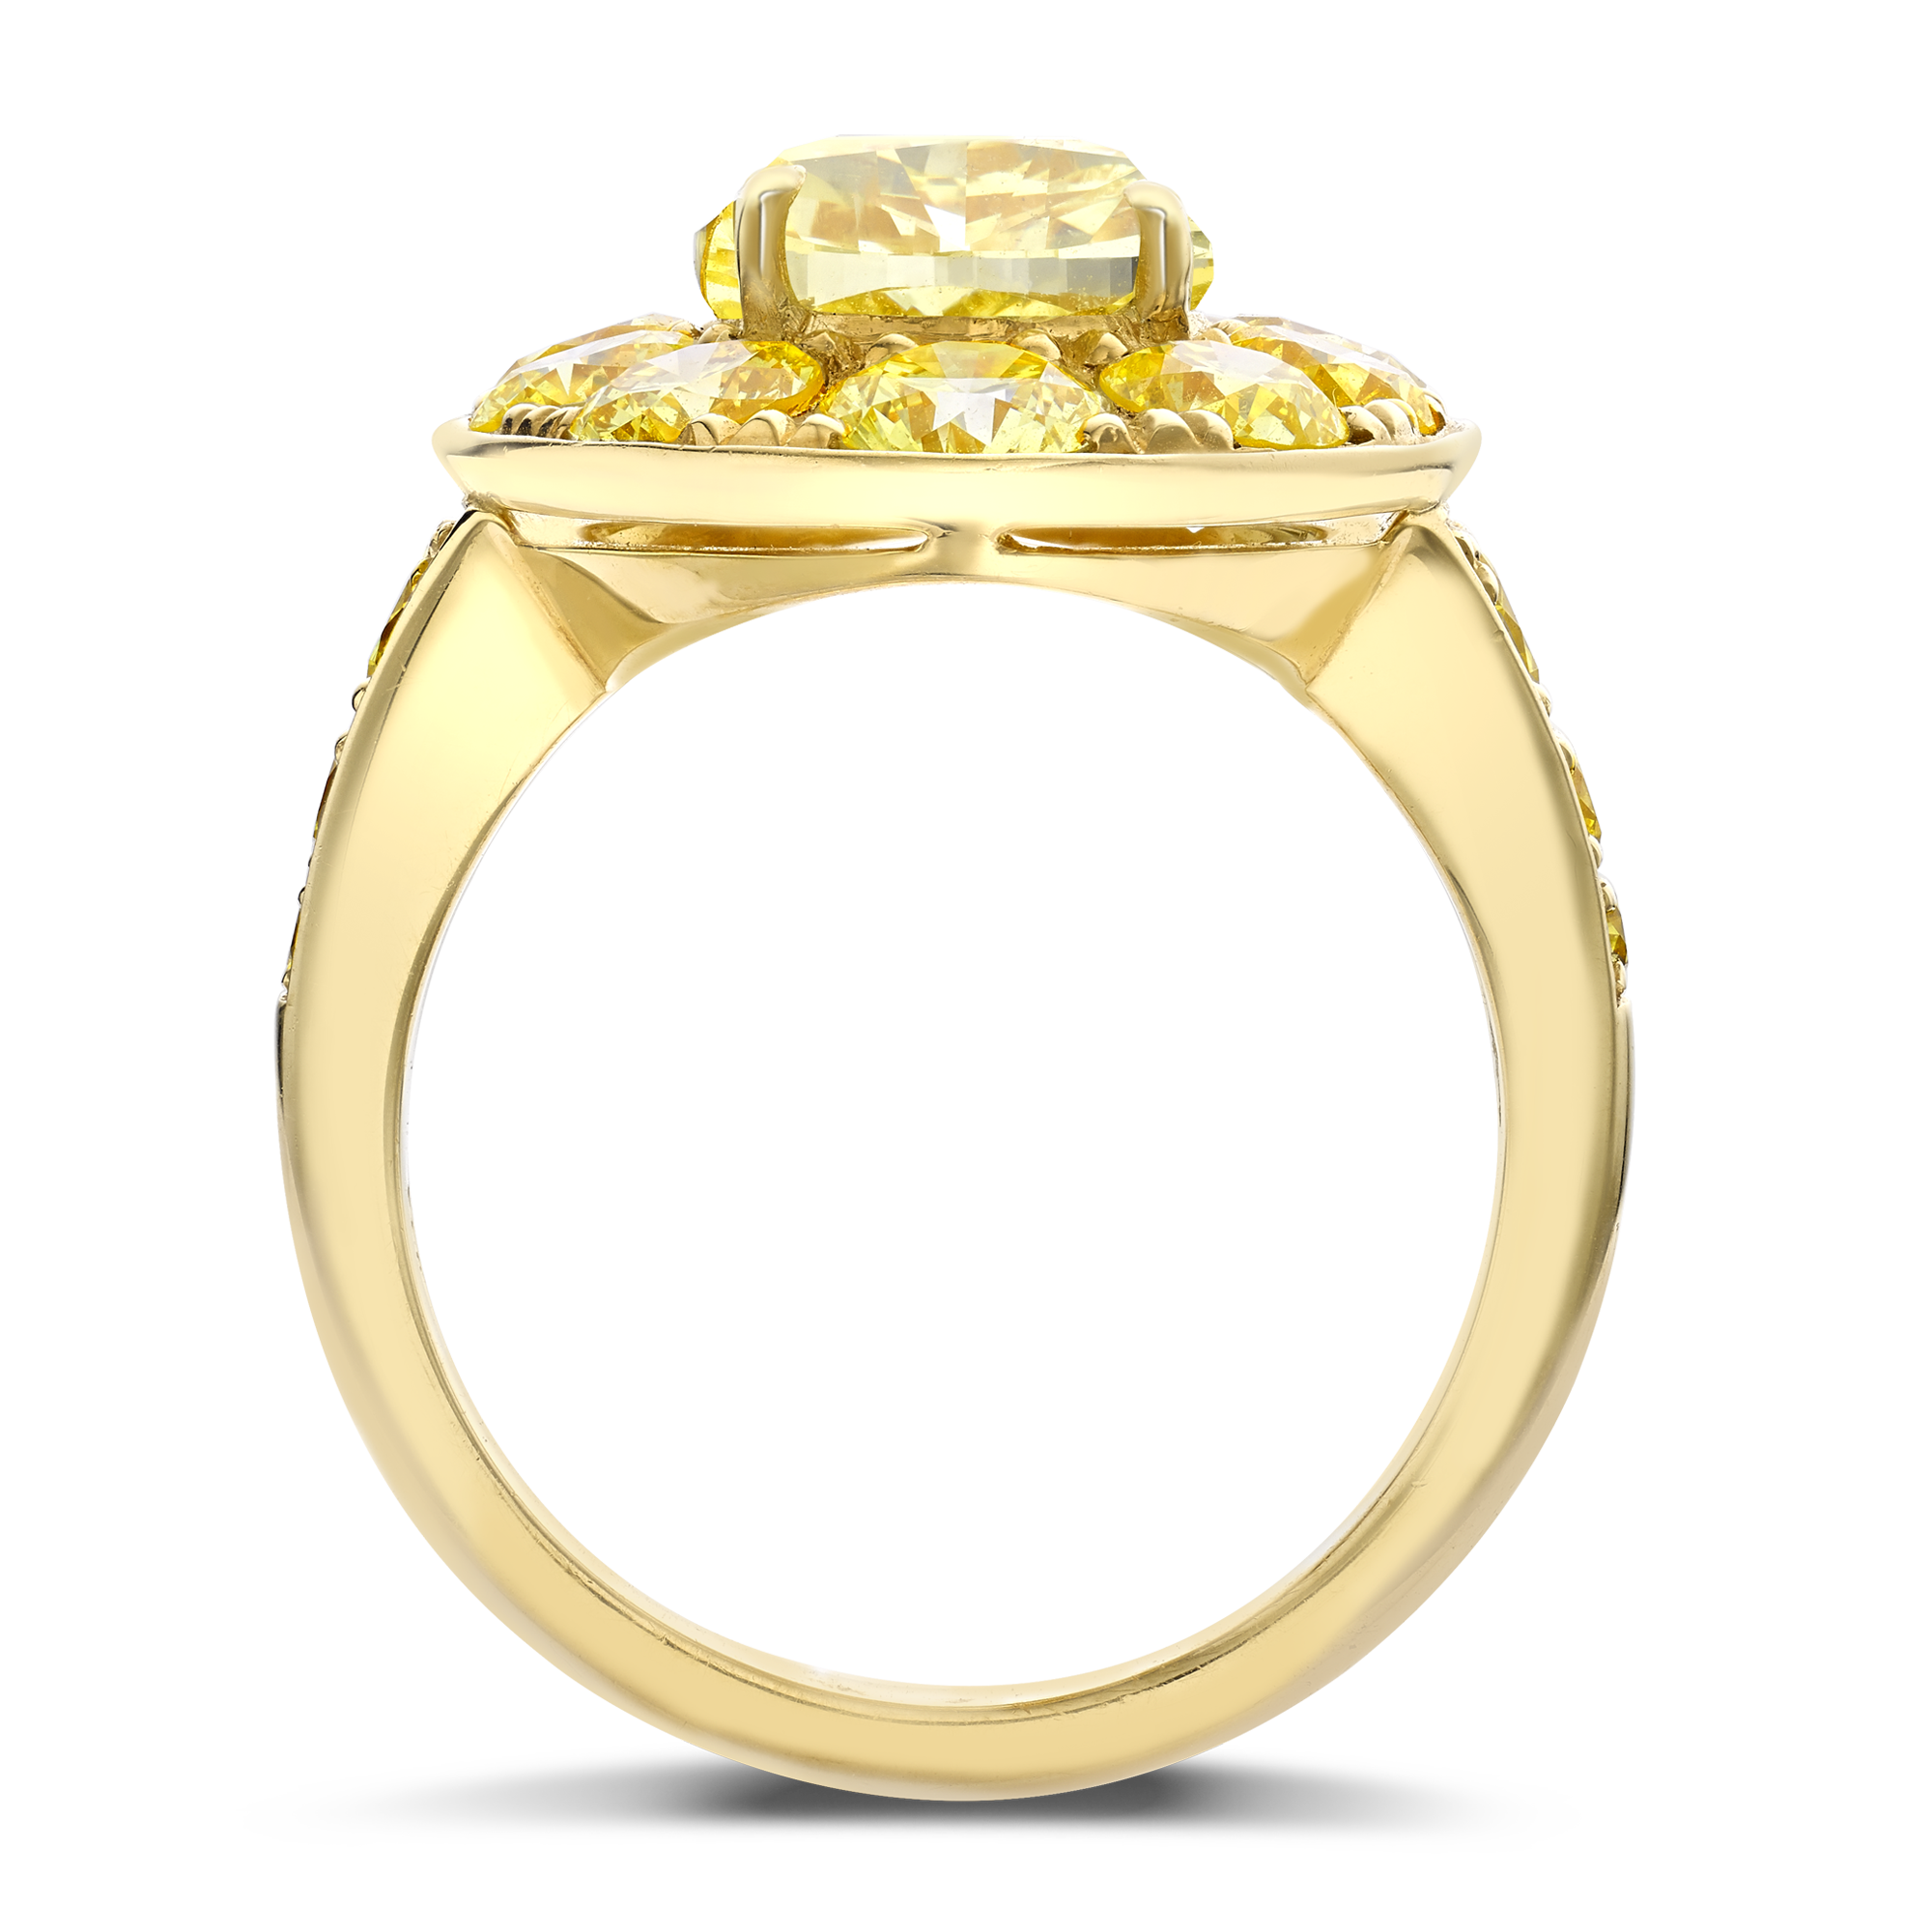 Masterpiece 3.47ct Fancy Vivid Yellow Diamond Cluster Ring Oval Cut, Claw Set_3